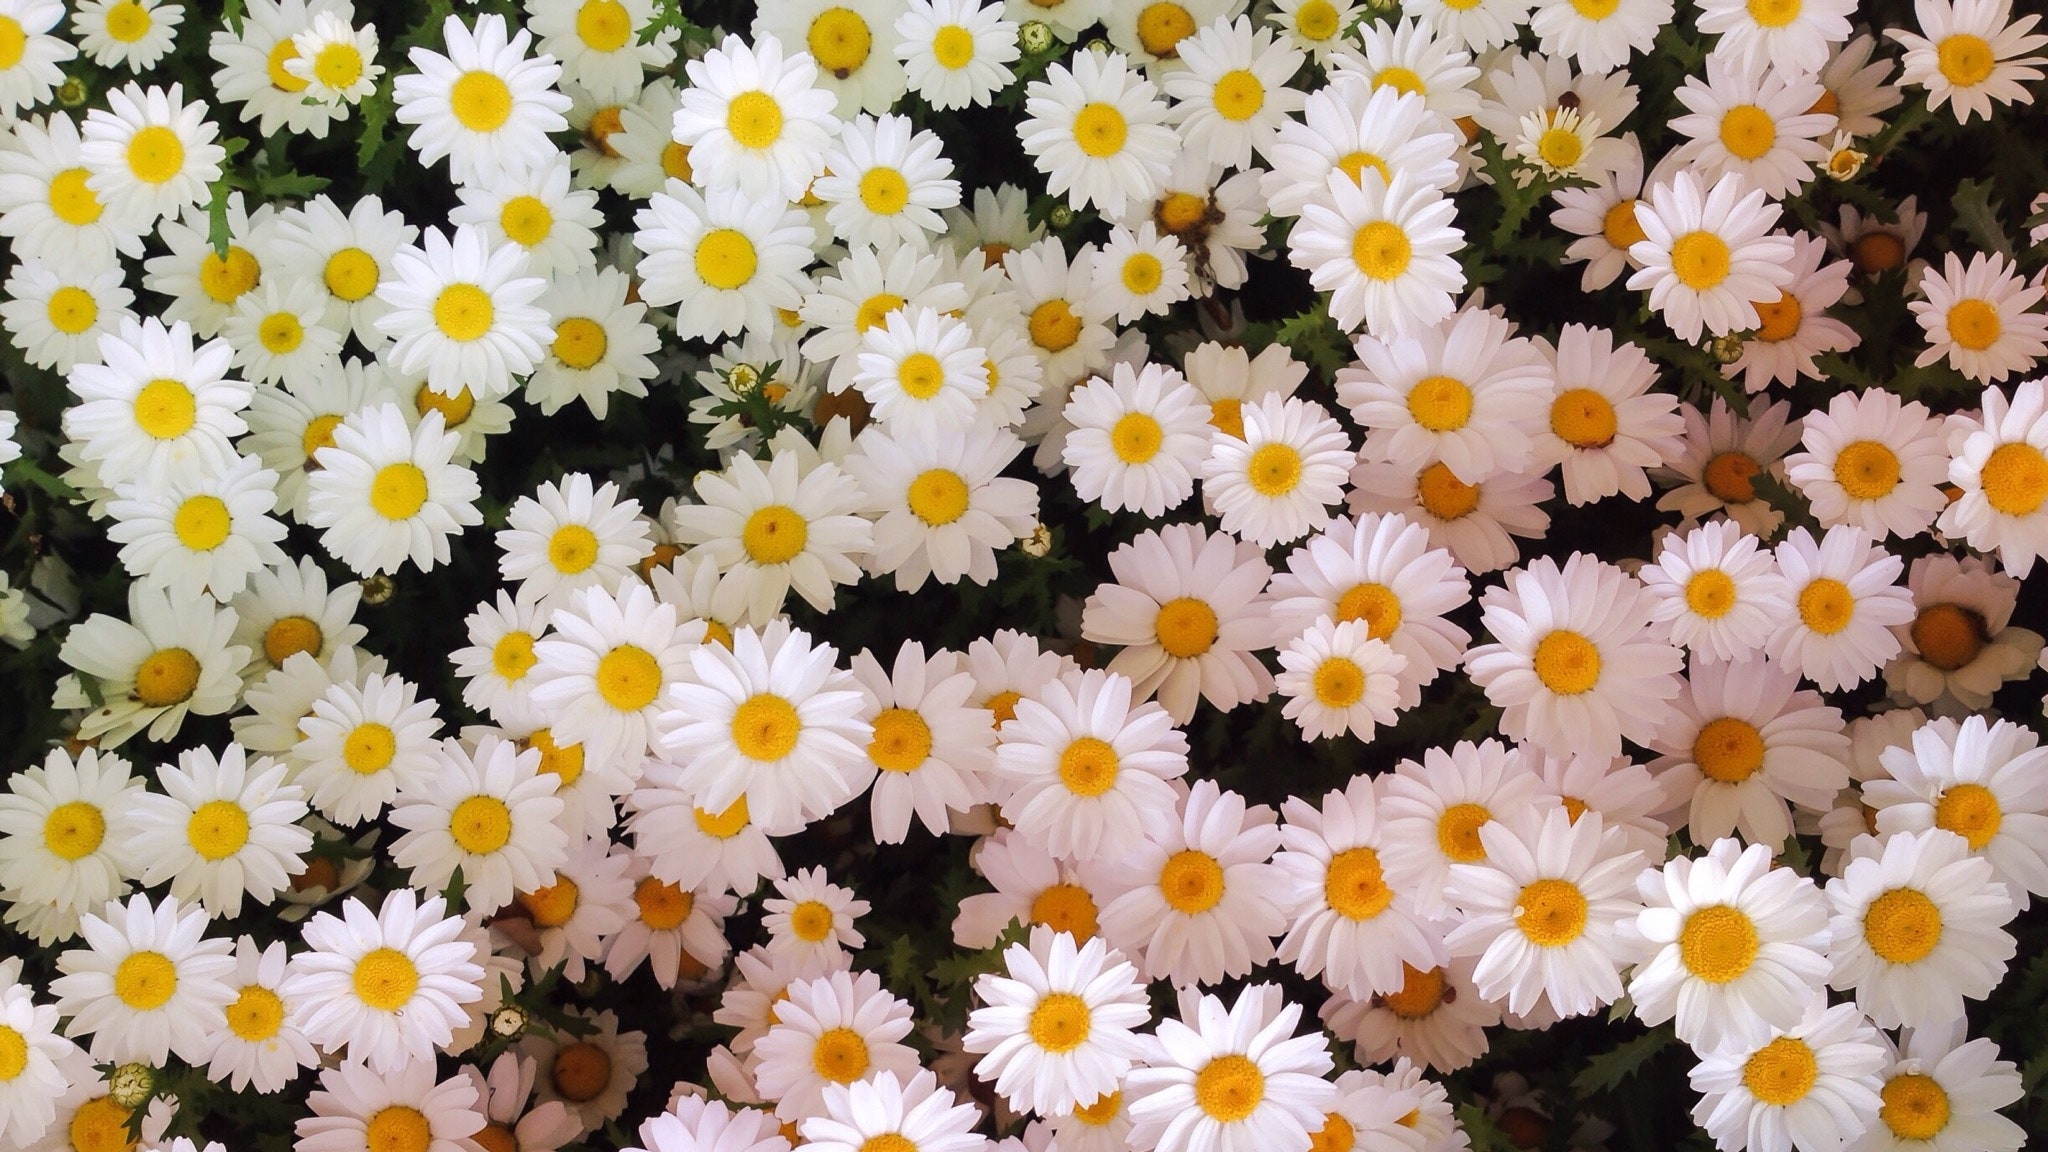 A close up of many white and yellow flowers - Daisy